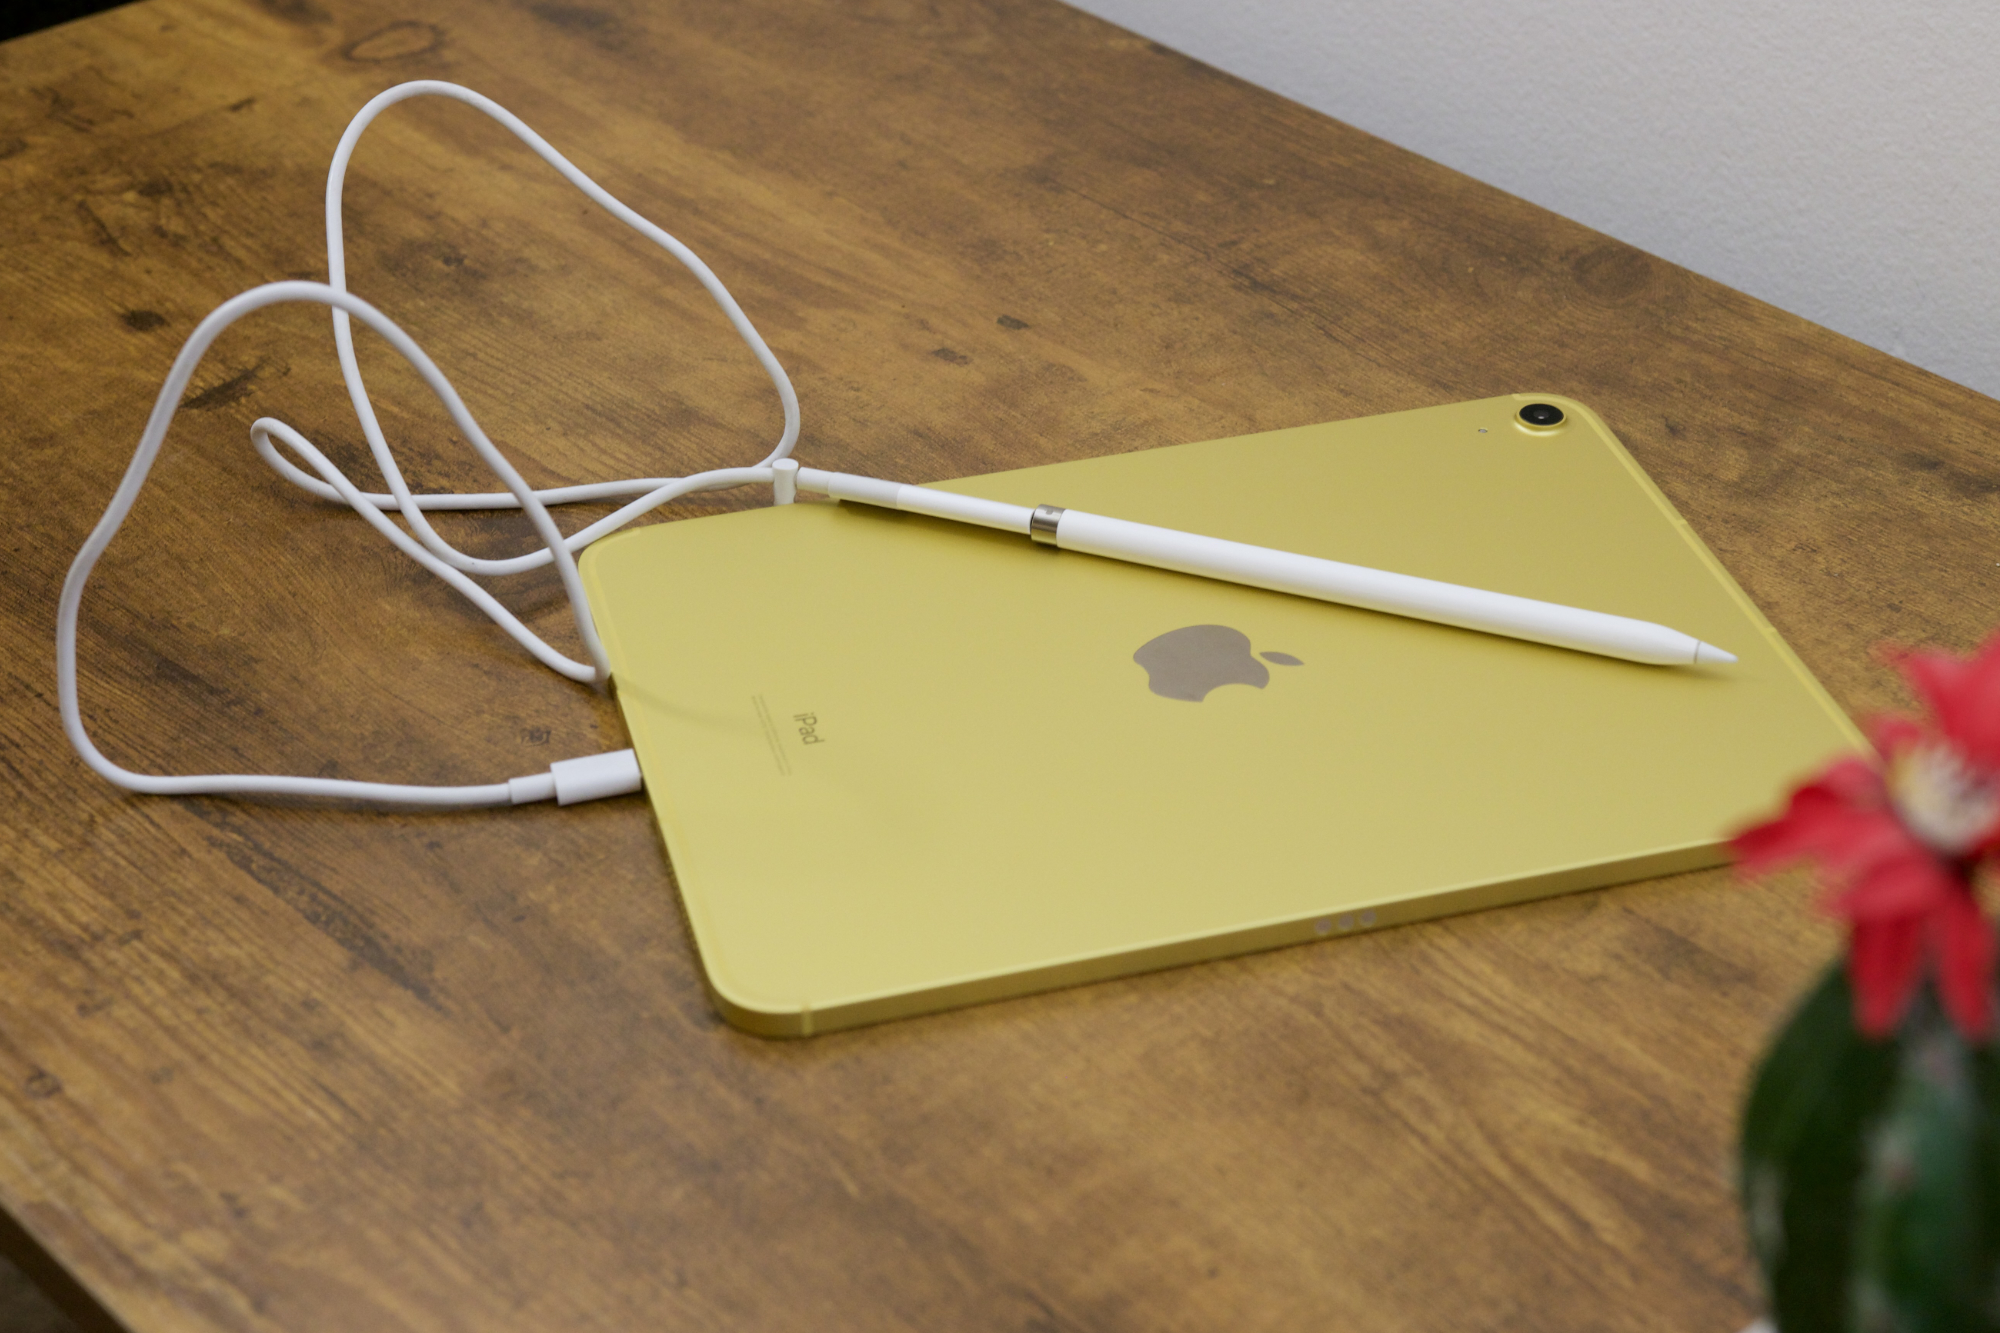 The iPad (2022) with an Apple Pencil plugged into it using a USB-C cable and adapter.